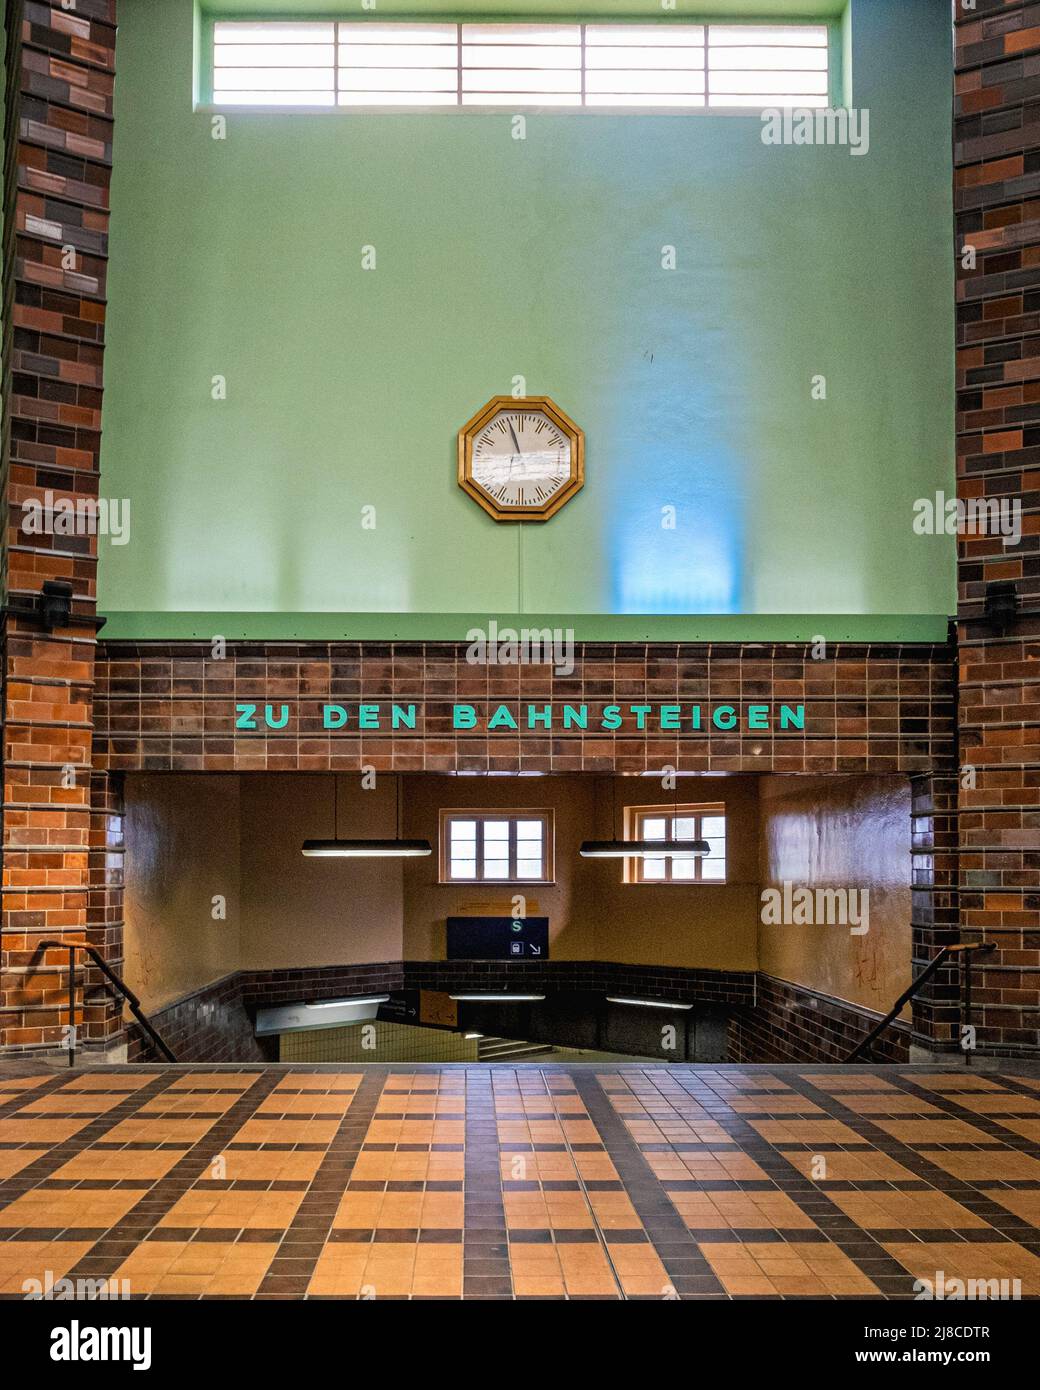 Berlin-Wannsee railway station interior. Important junction in the commuter transport network serving the S-bahn and Deutsche Bahn train services. Stock Photo